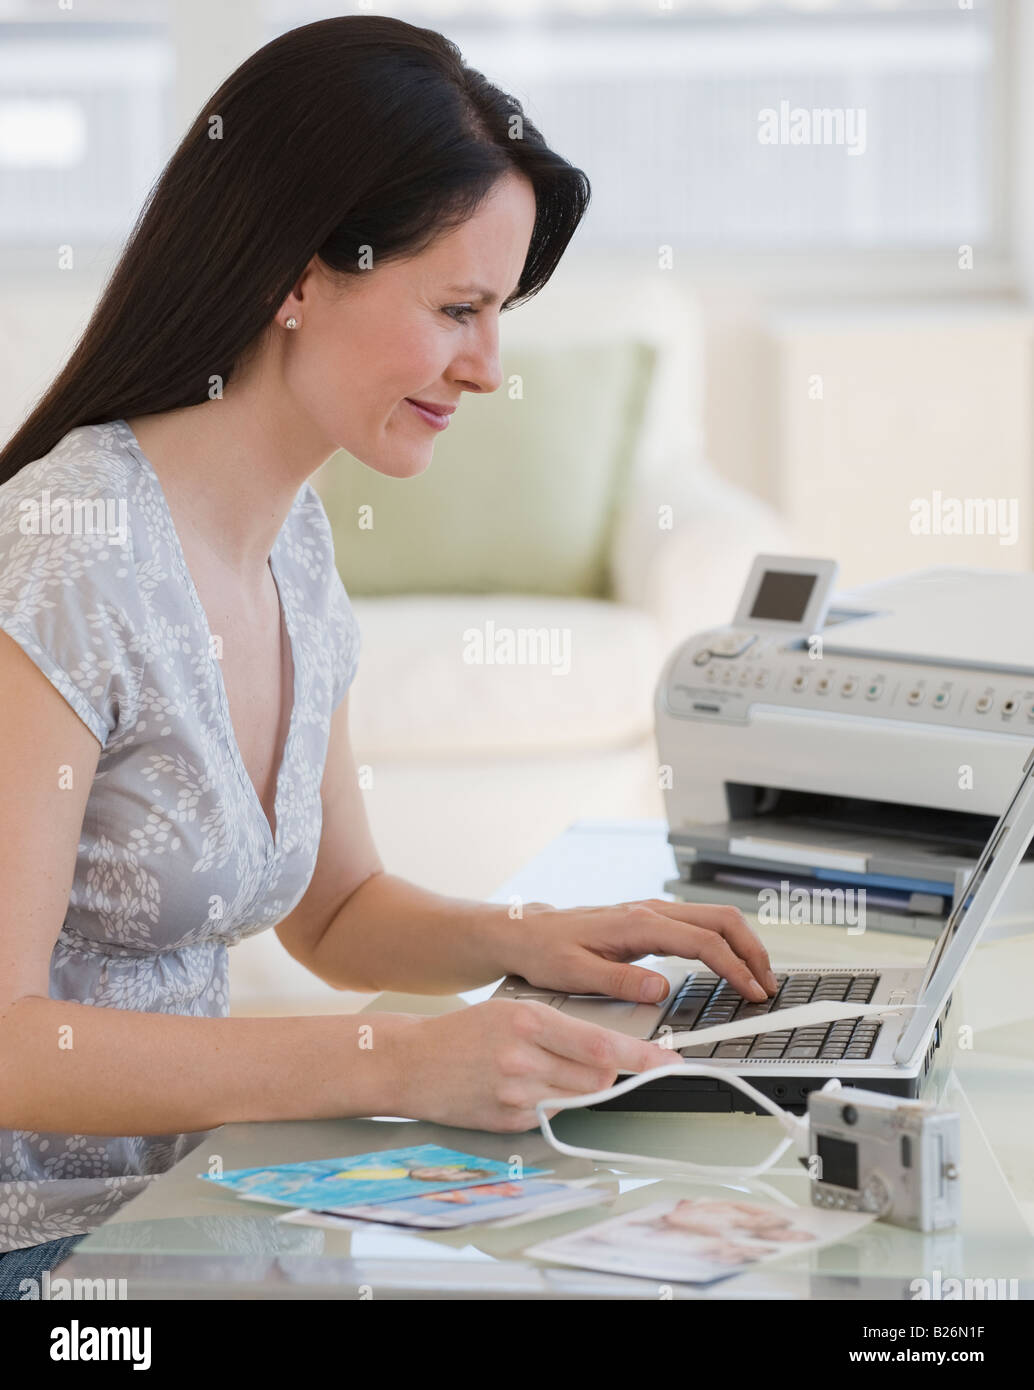 Woman typing on laptop Banque D'Images